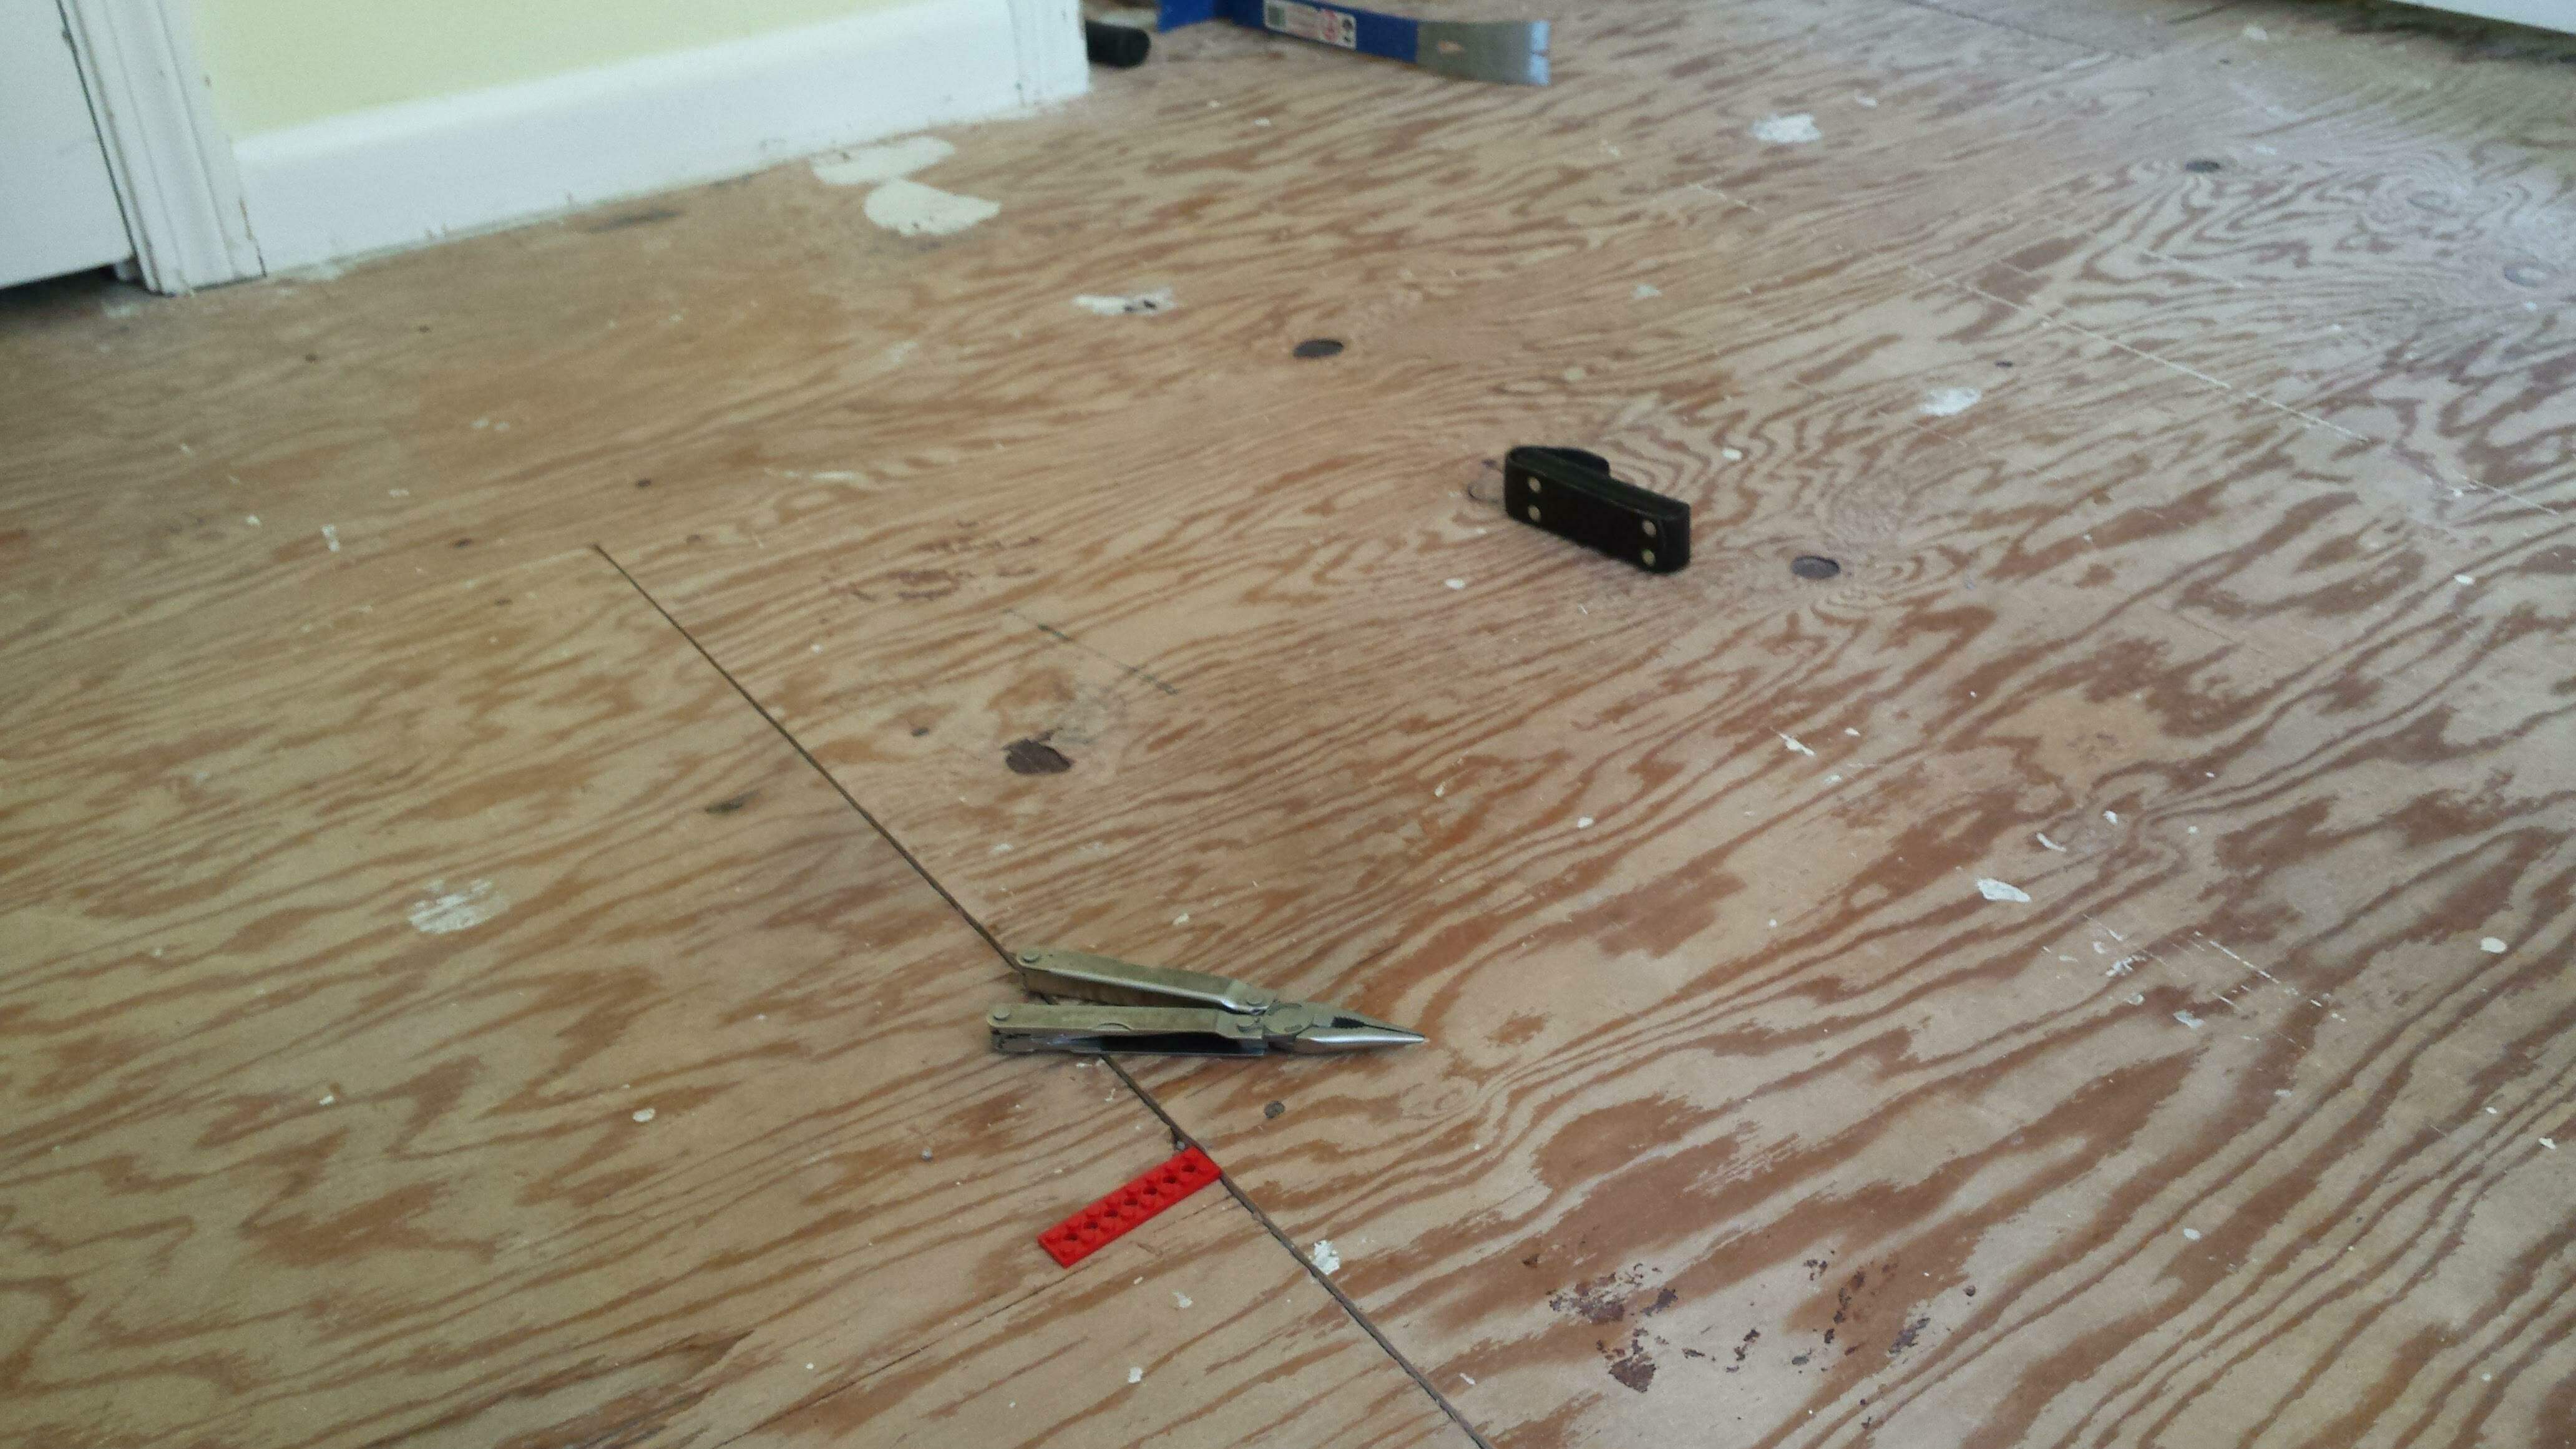 Suloor For Tile Installation, How To Level A Plywood Floor Before Tiling